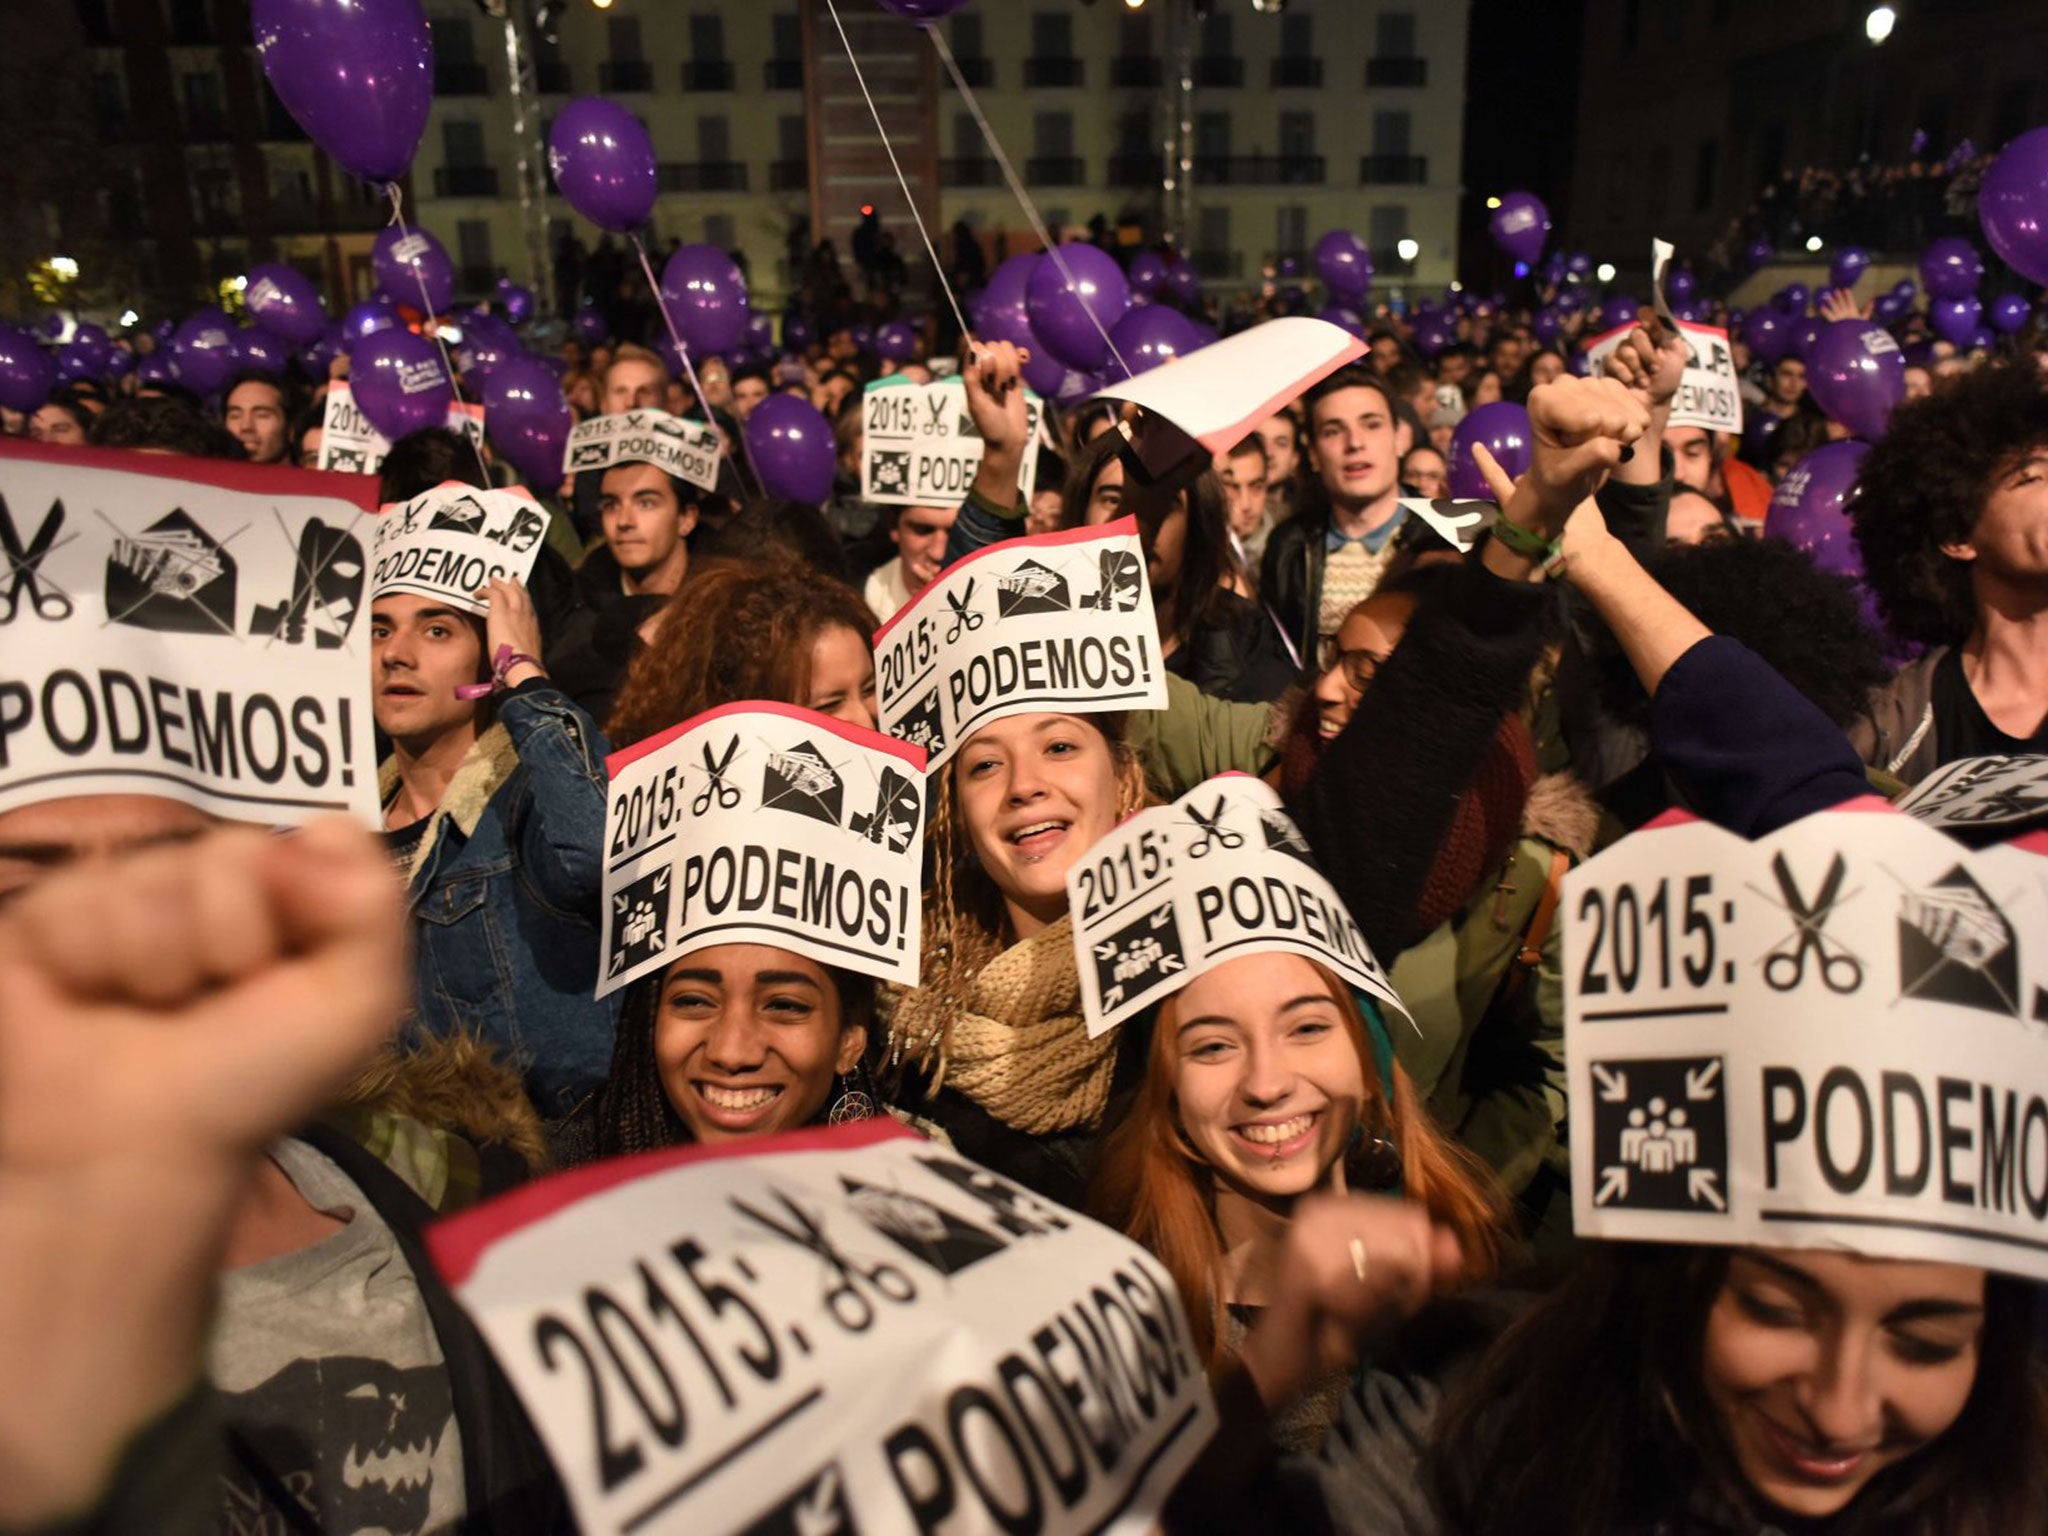 Supporters of Podemos celebrating in Madrid on Sunday night (Afp/Getty)